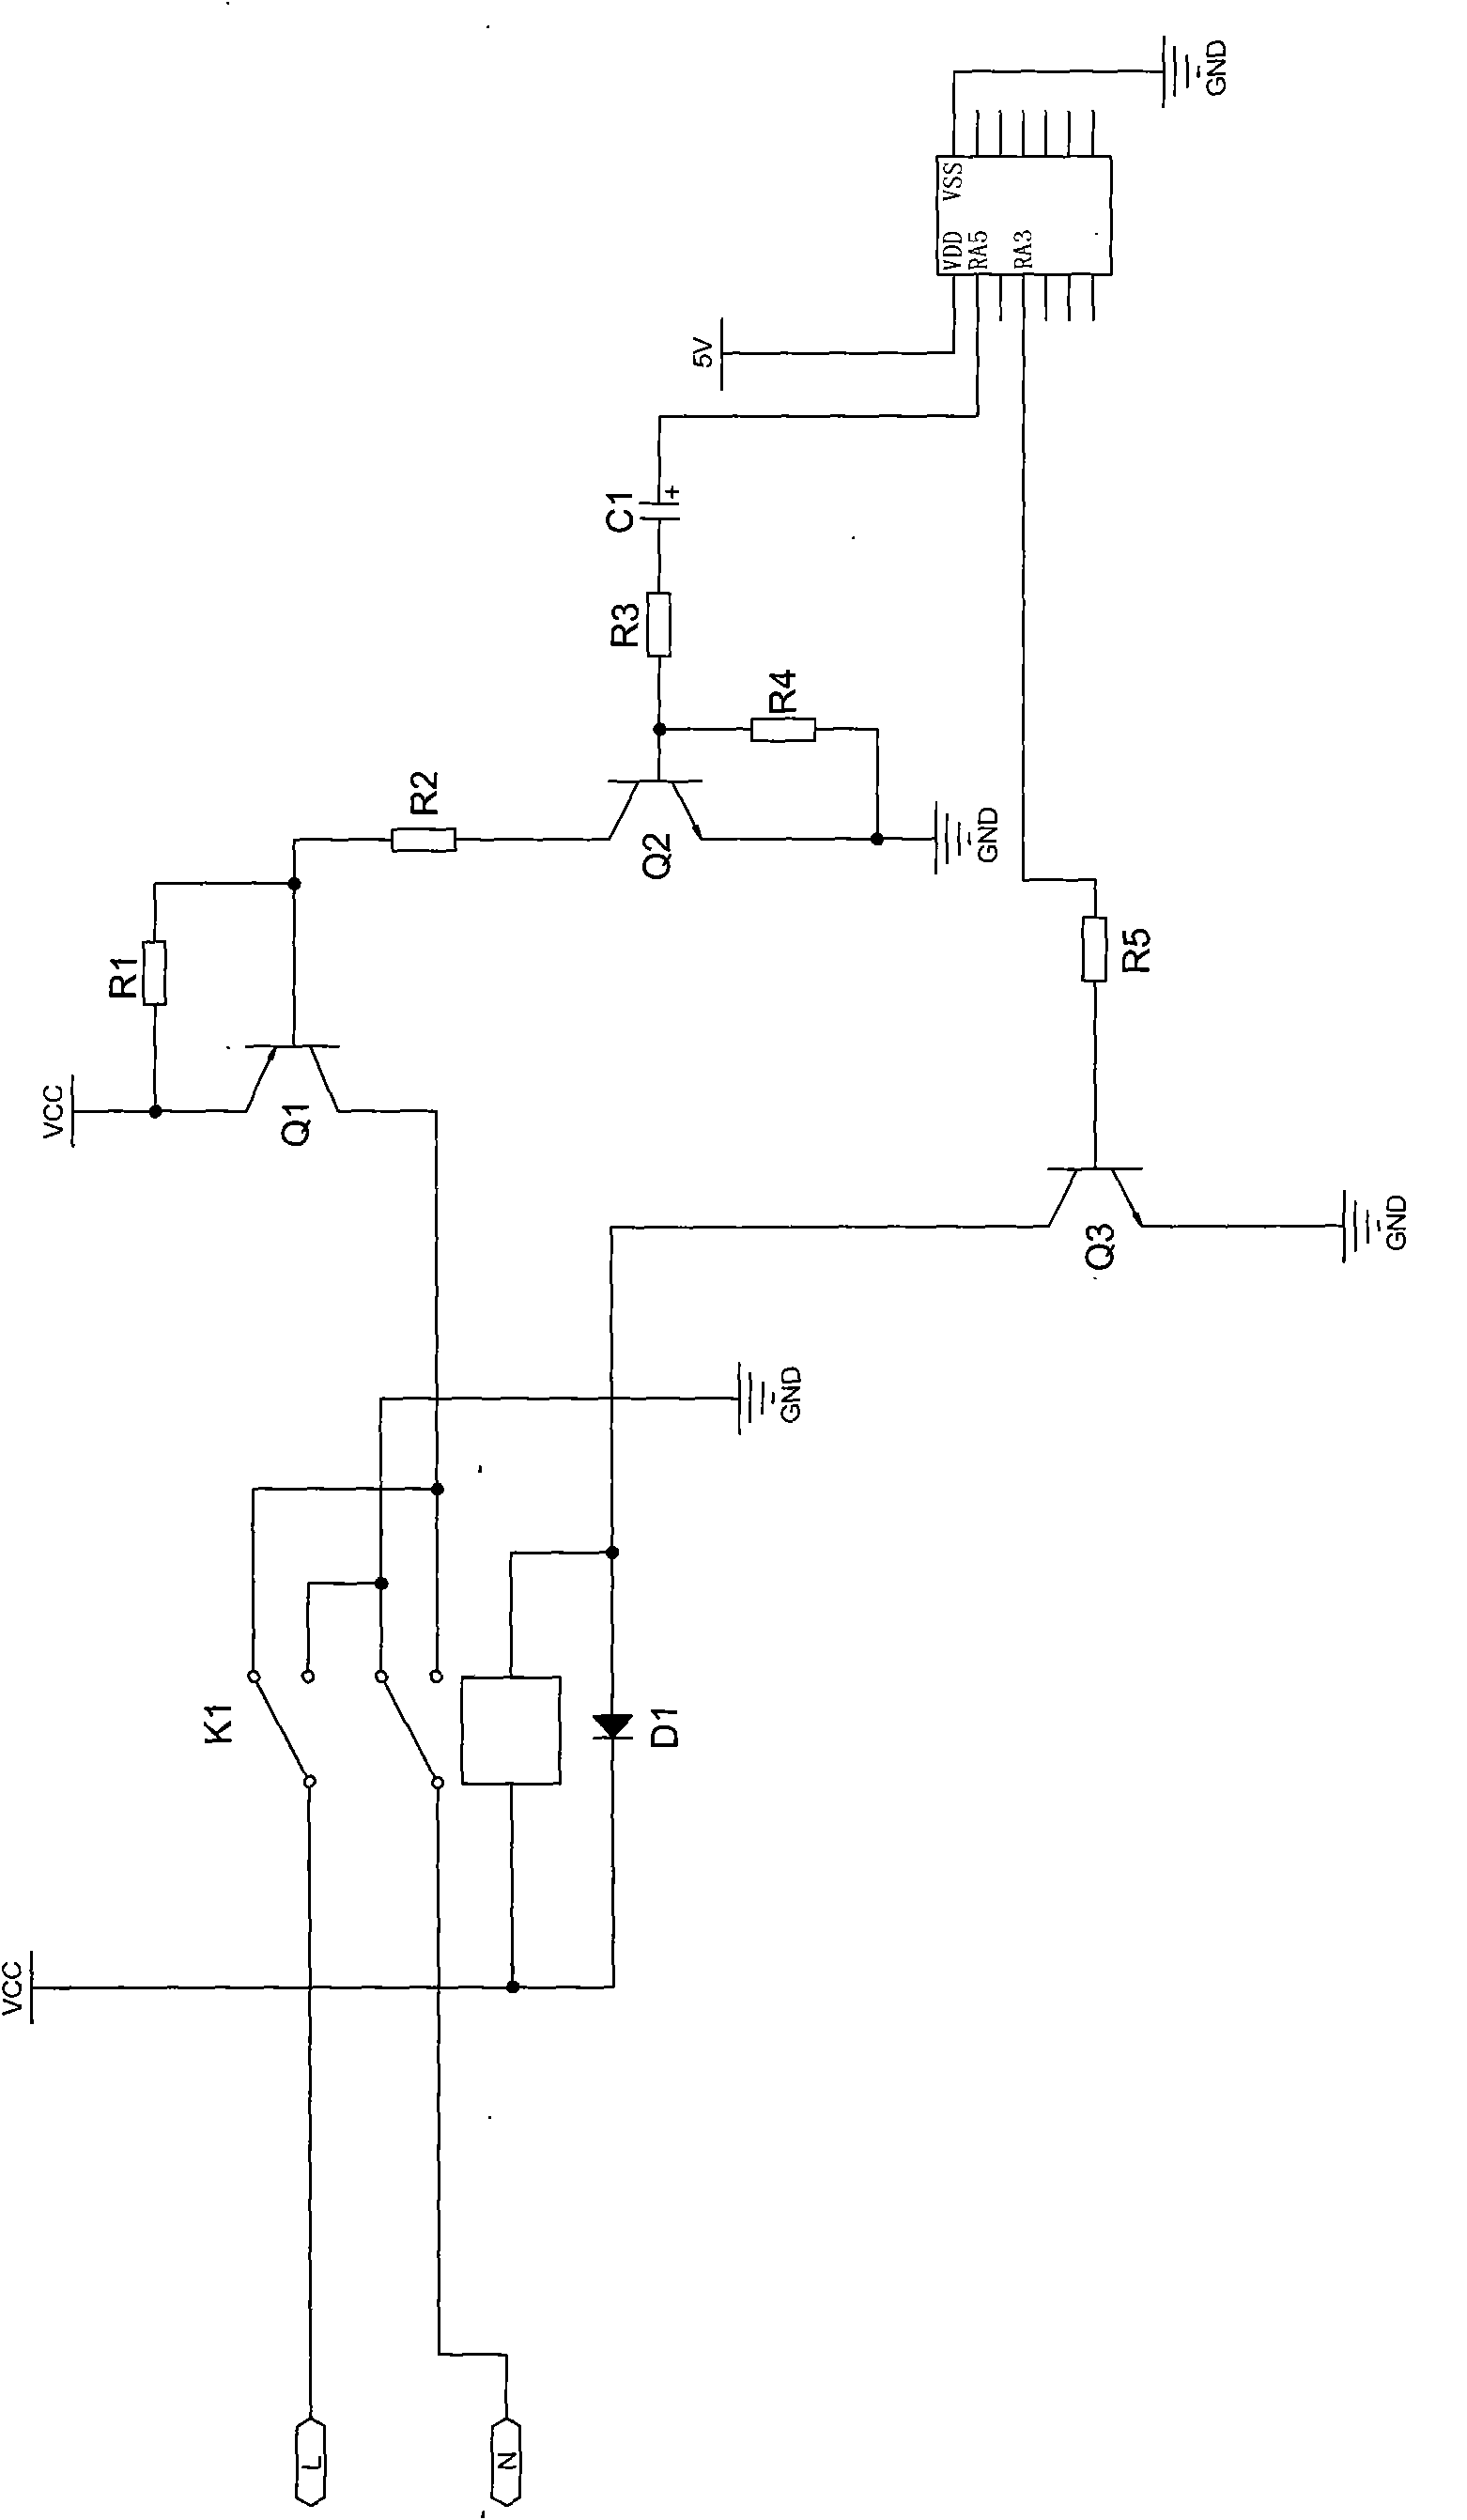 Motor constant-speed forward/reverse rotation control circuit